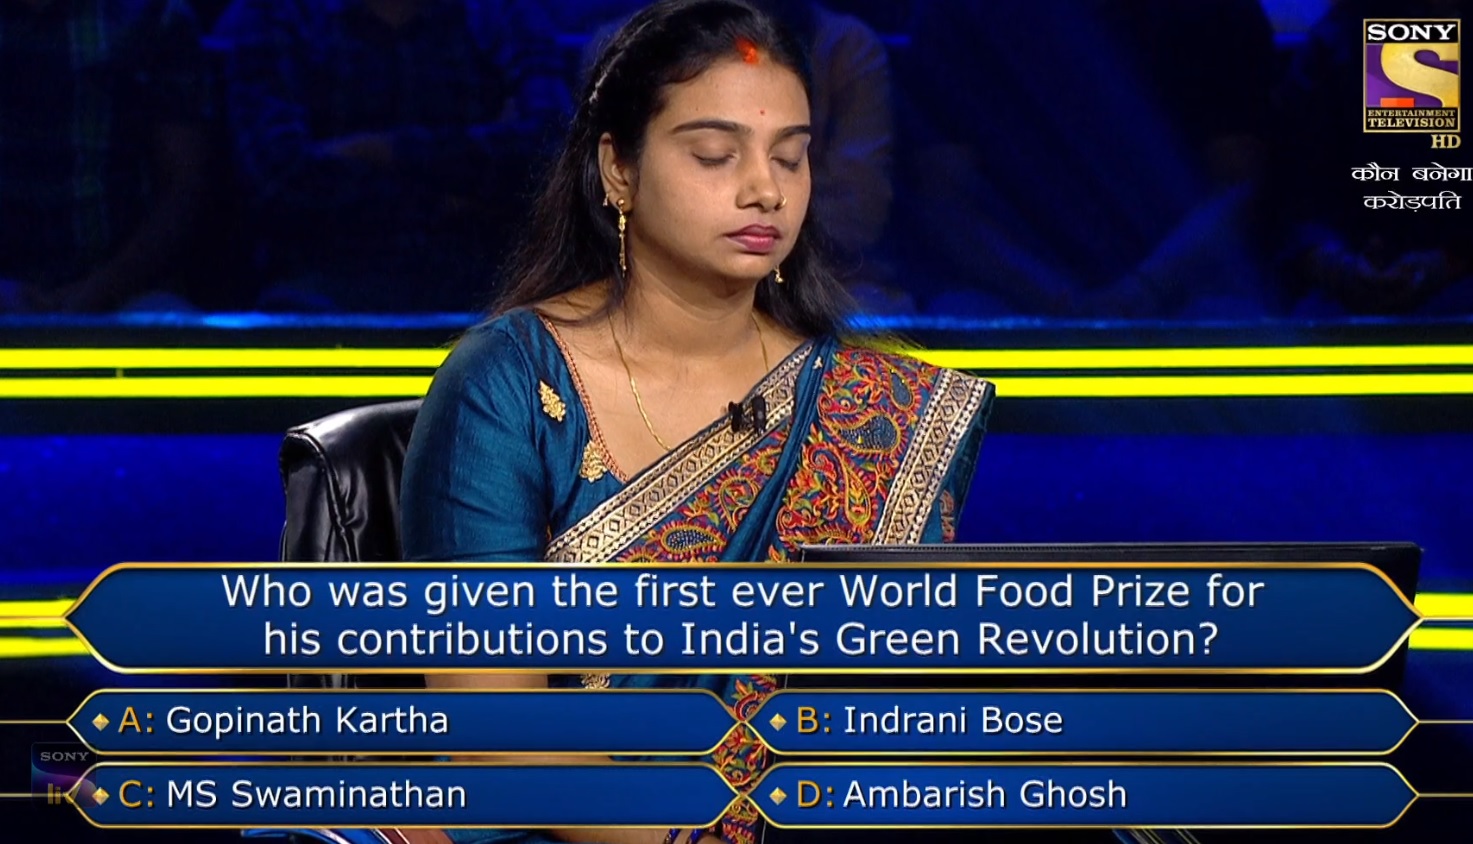 Ques : Who was given the first ever World Food Prize for his contribution to India’s Green Revolution?